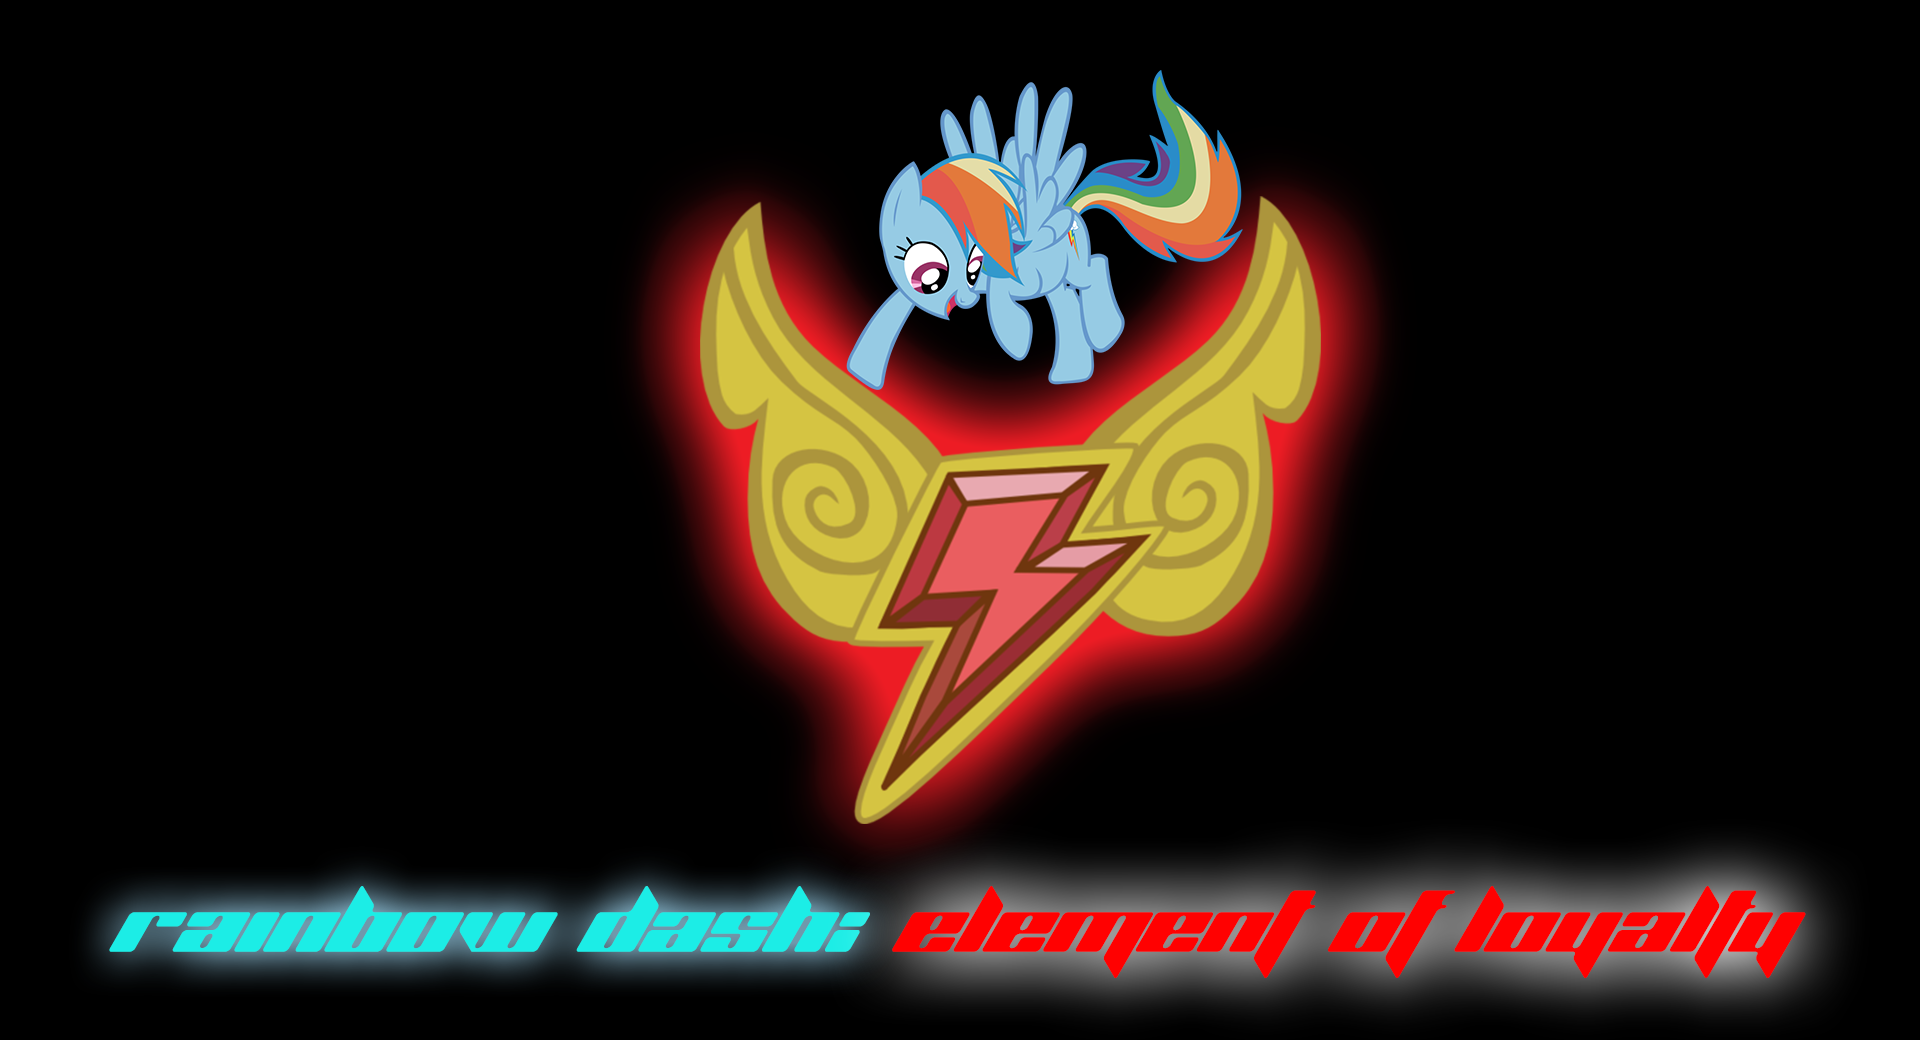 Rainbow Dash - Element of Loyalty "Glow" wallpaper by DjDa5h and Sniffy92